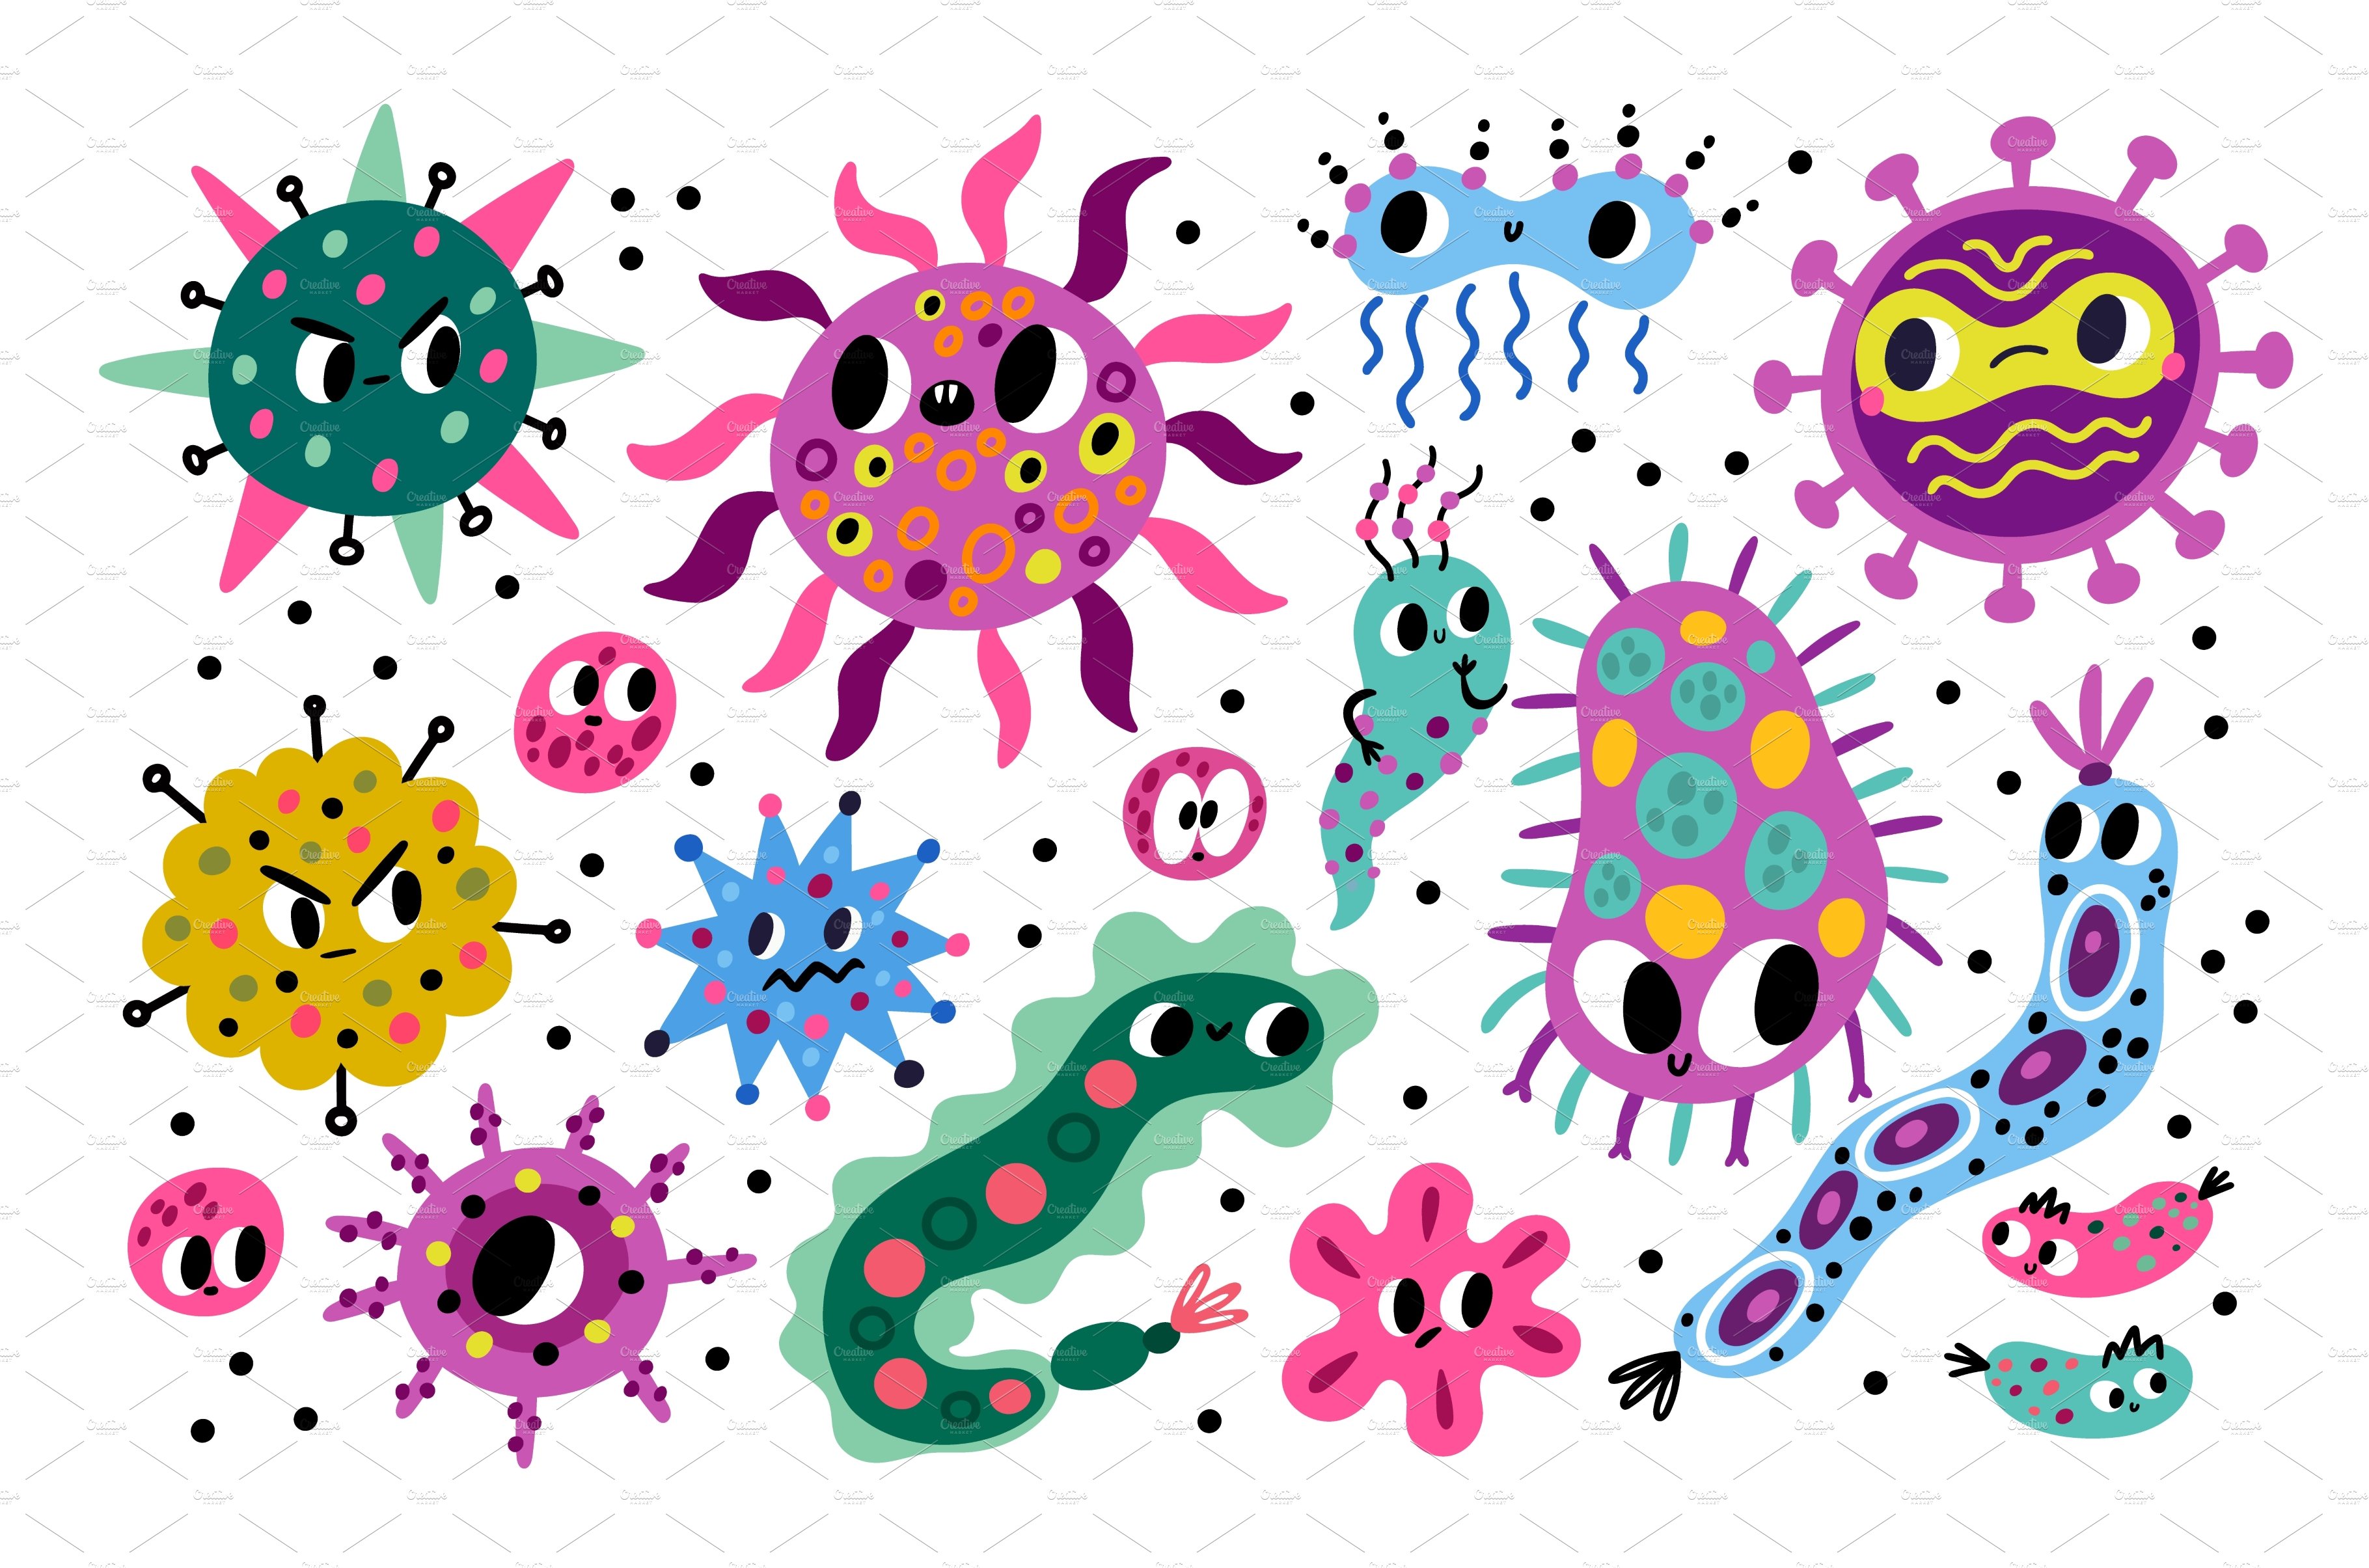 Germ characters. Cartoon bacteria cover image.